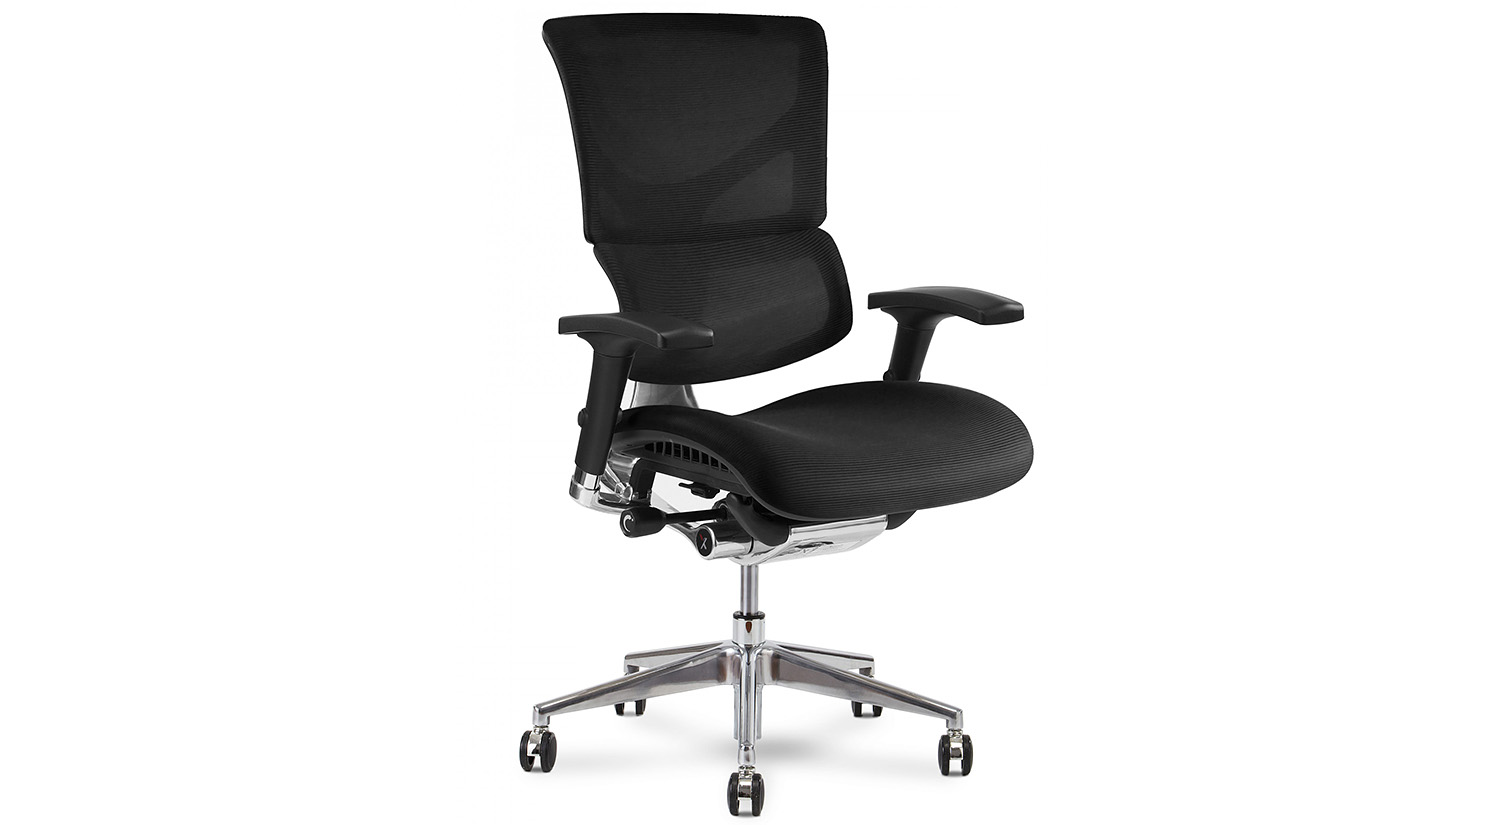 https://www.circlefurniture.com/userfiles/images/Products/X-Chair/X3-ATR-Mgmt-Chair/x3-ATR-mgmt-chair-45-main.jpg